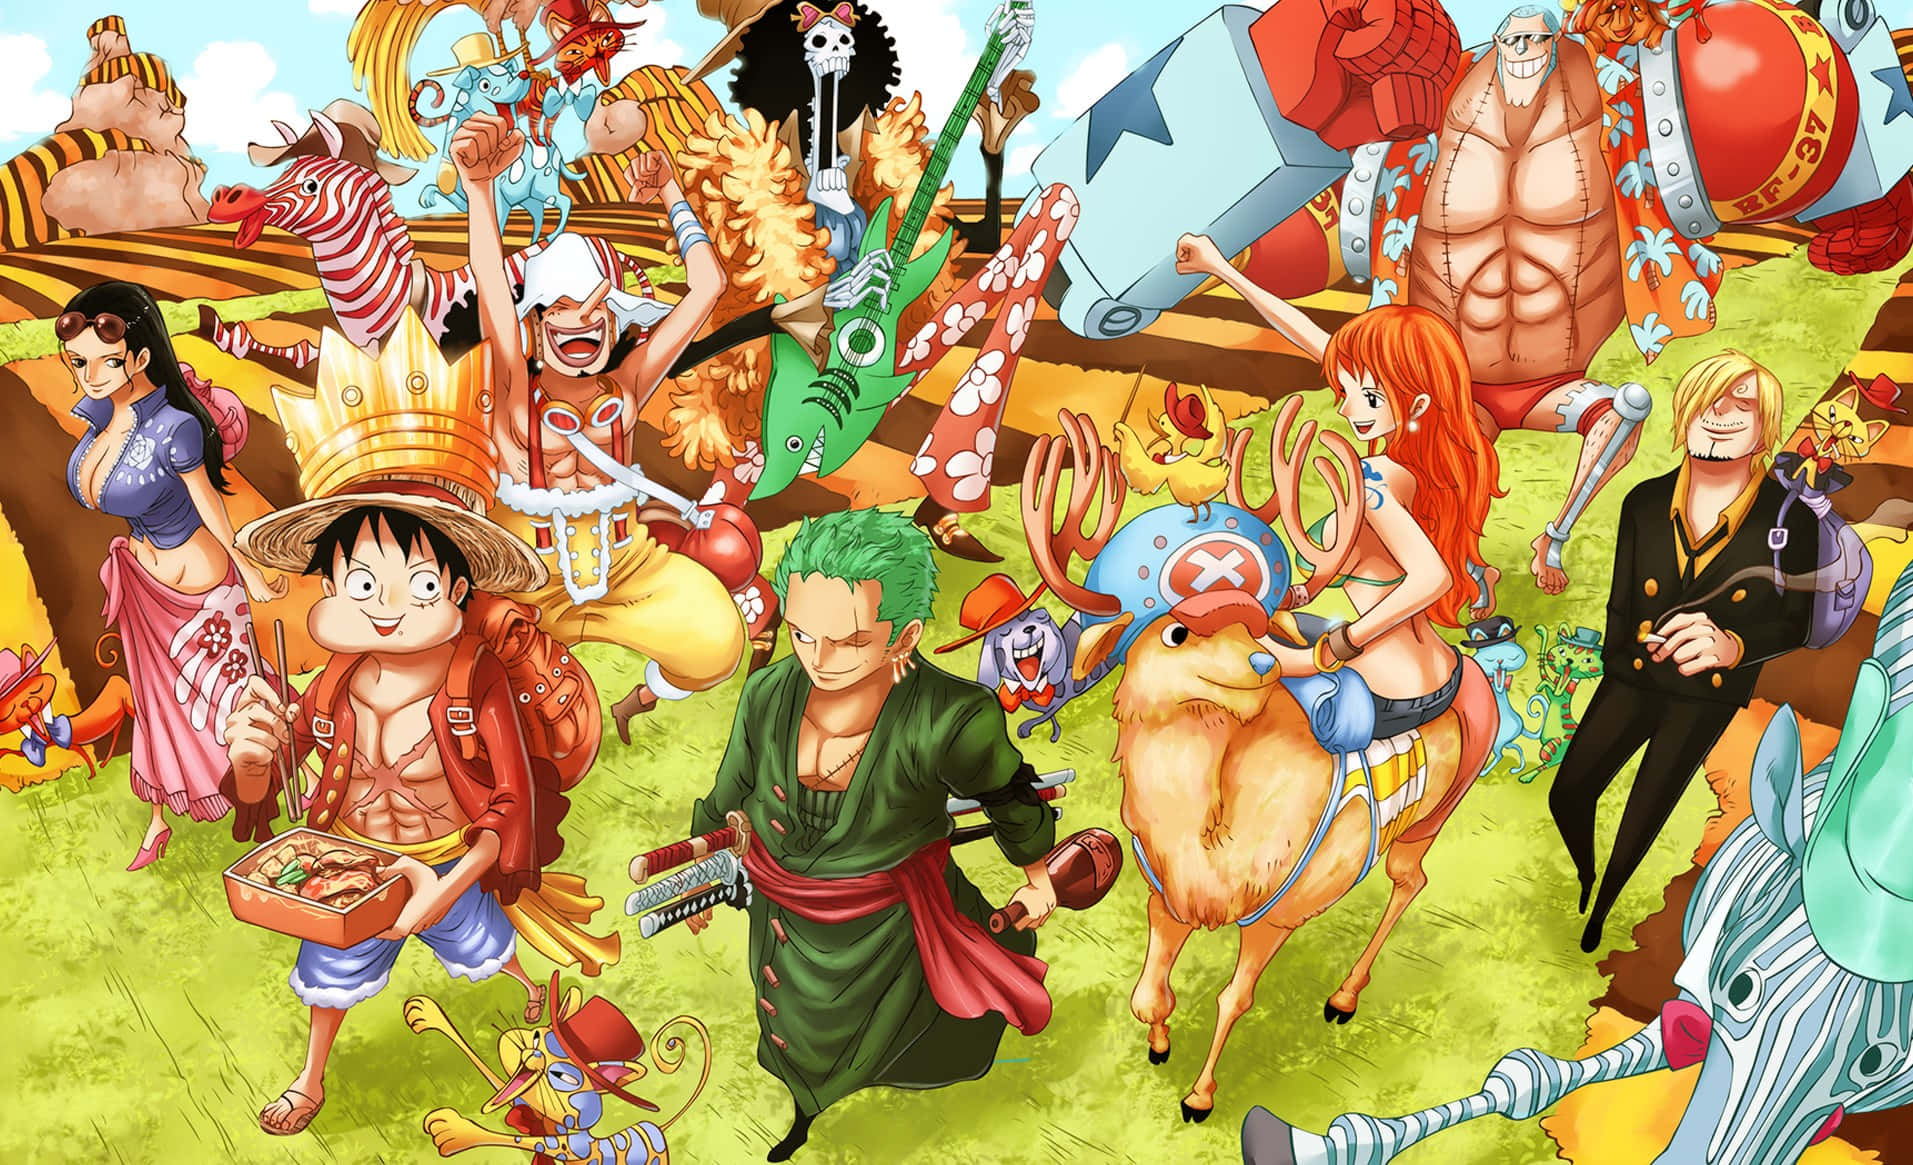 Welcome to Dressrosa - the land of adventure and excitement!" Wallpaper